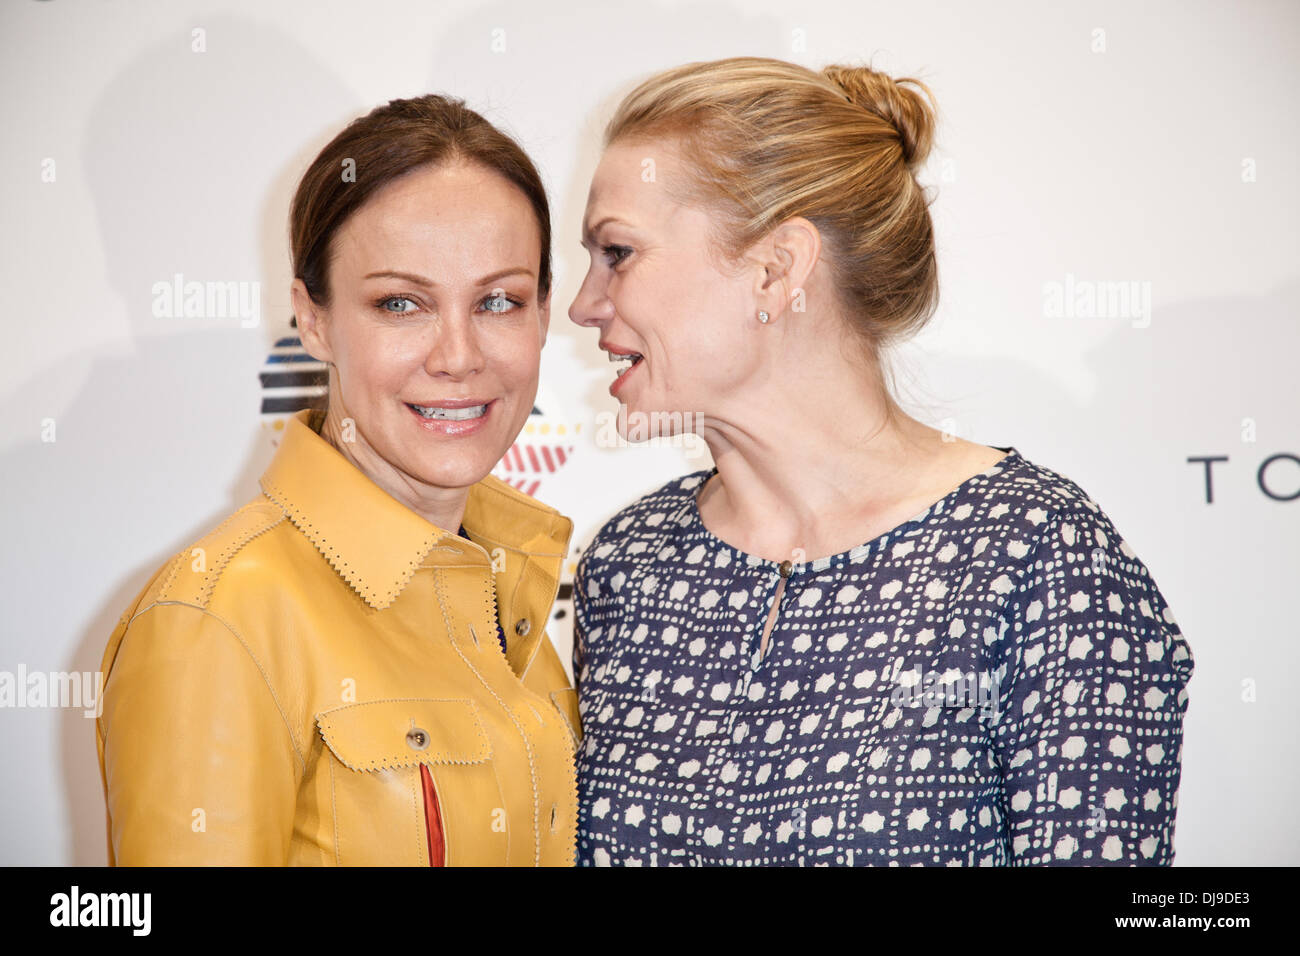 Sonja Kirchberger and Anna Loos attending Tommy Hilfiger Store Event 'The  Promise' at Alte Post. Hamburg, Germany - 18.04.2012 Stock Photo - Alamy